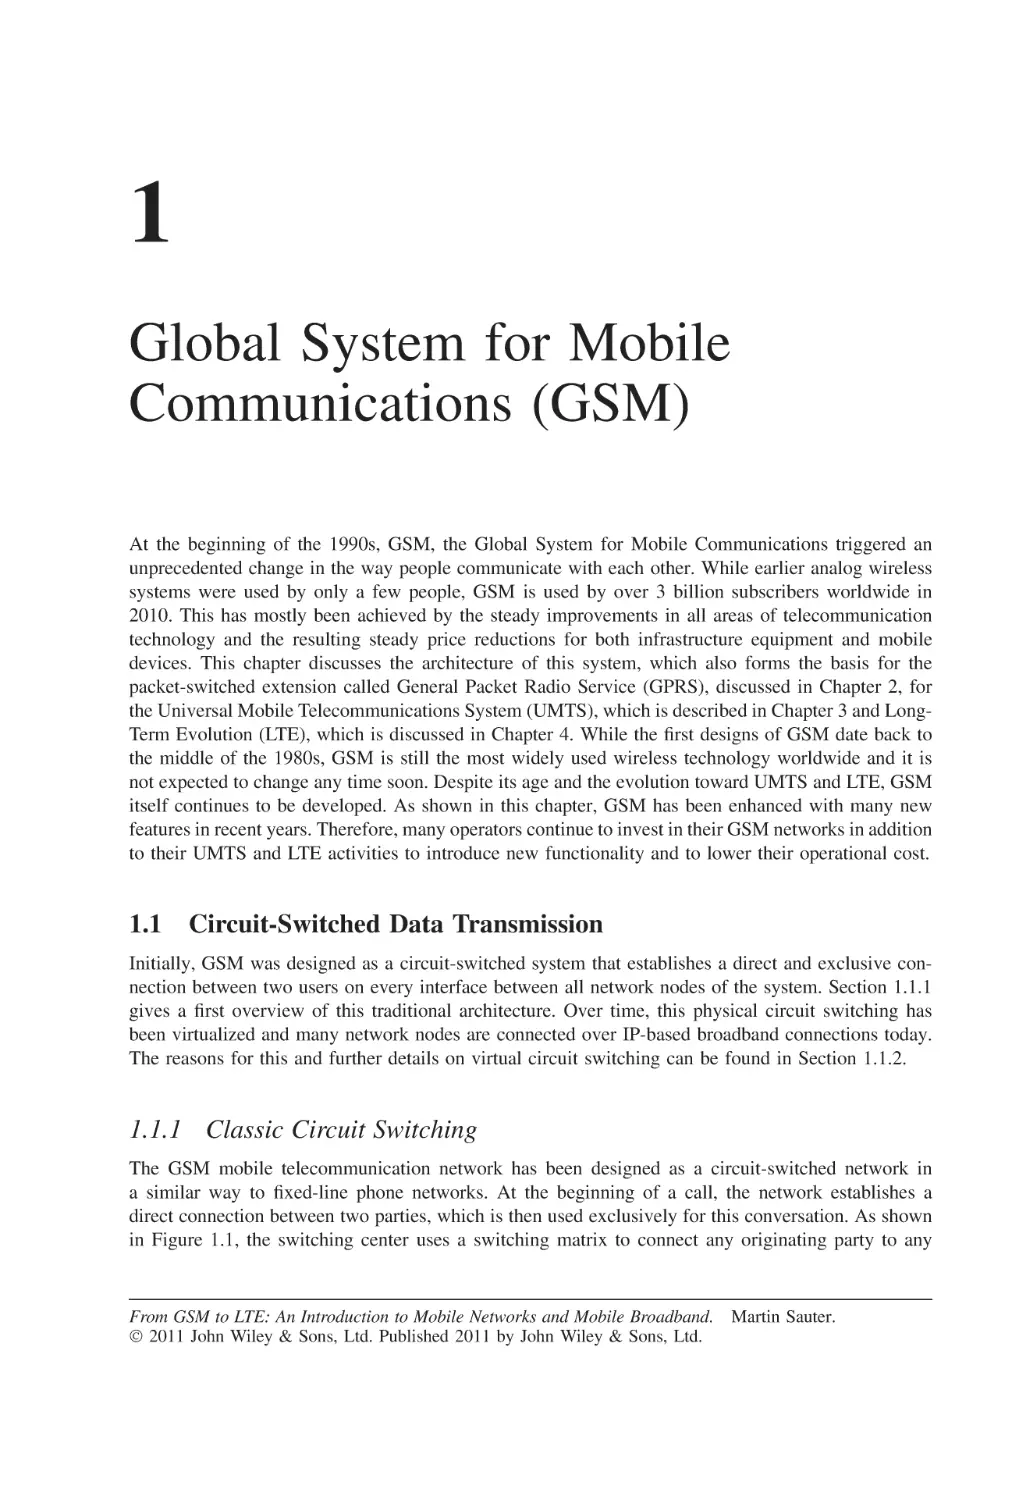 1 Global System for Mobile Communications (GSM)
1.1 Circuit-Switched Data Transmission
1.1.1 Classic Circuit Switching